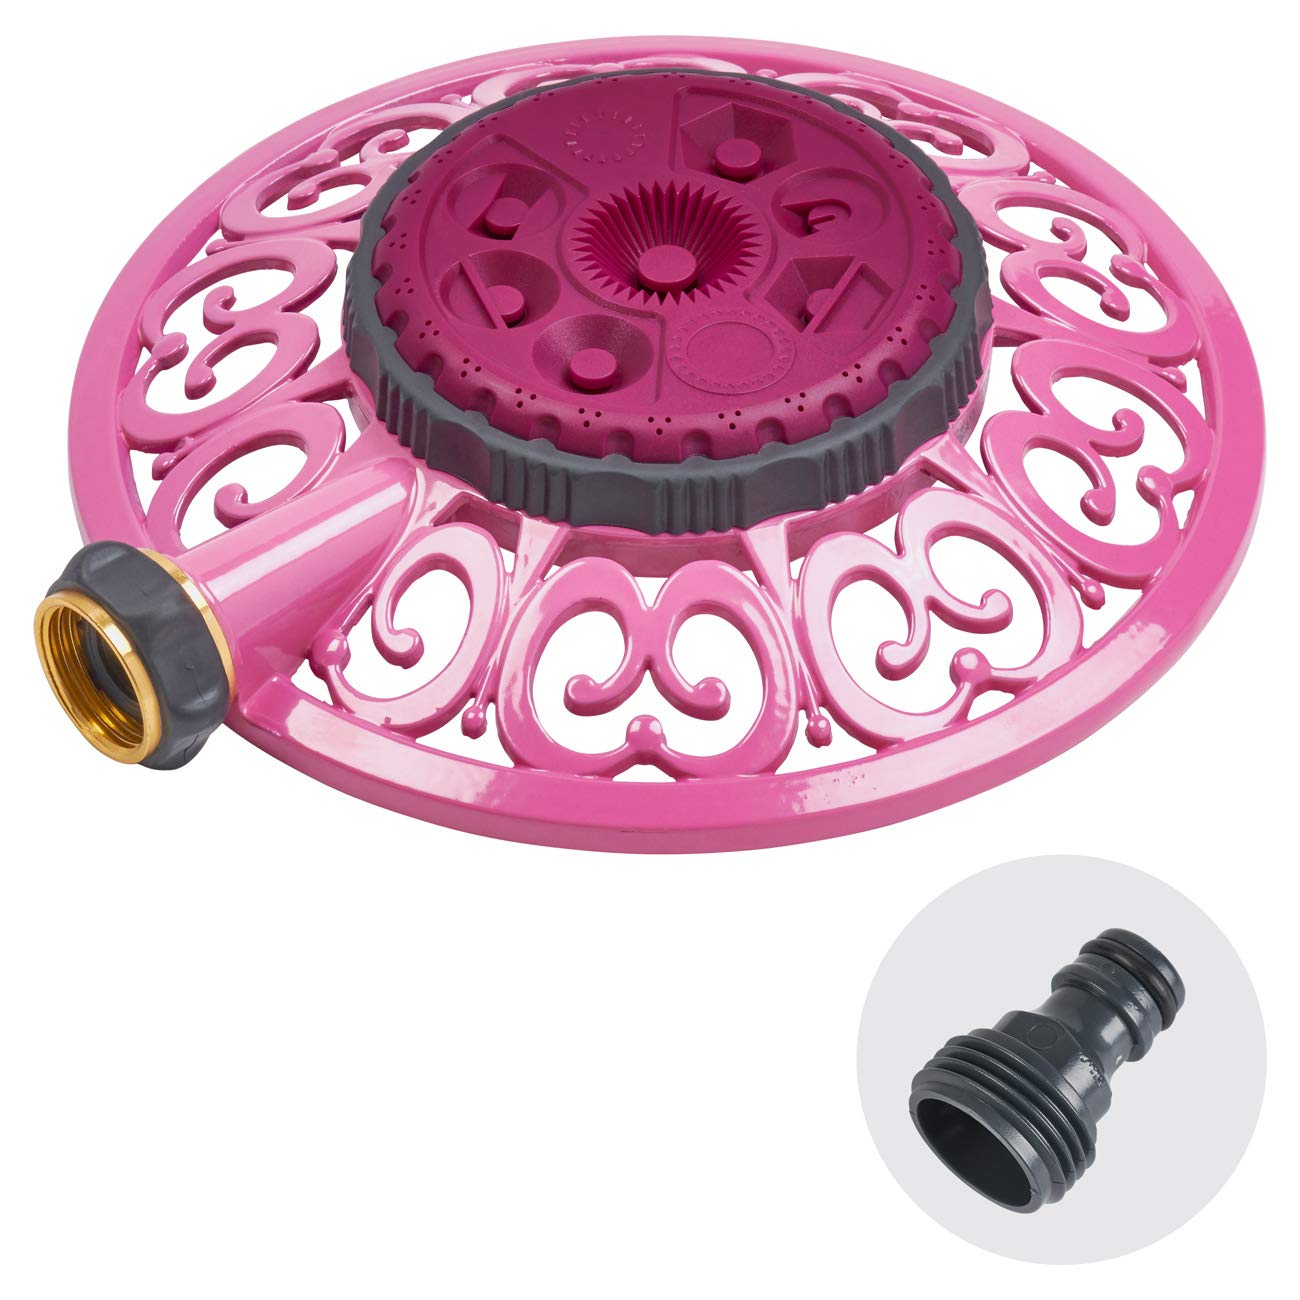 Sprout 65100-AMZ Metal 8-Pattern Sprinkler and QuickConnect Product Adapter Amazon Bundle, Raspberry Red